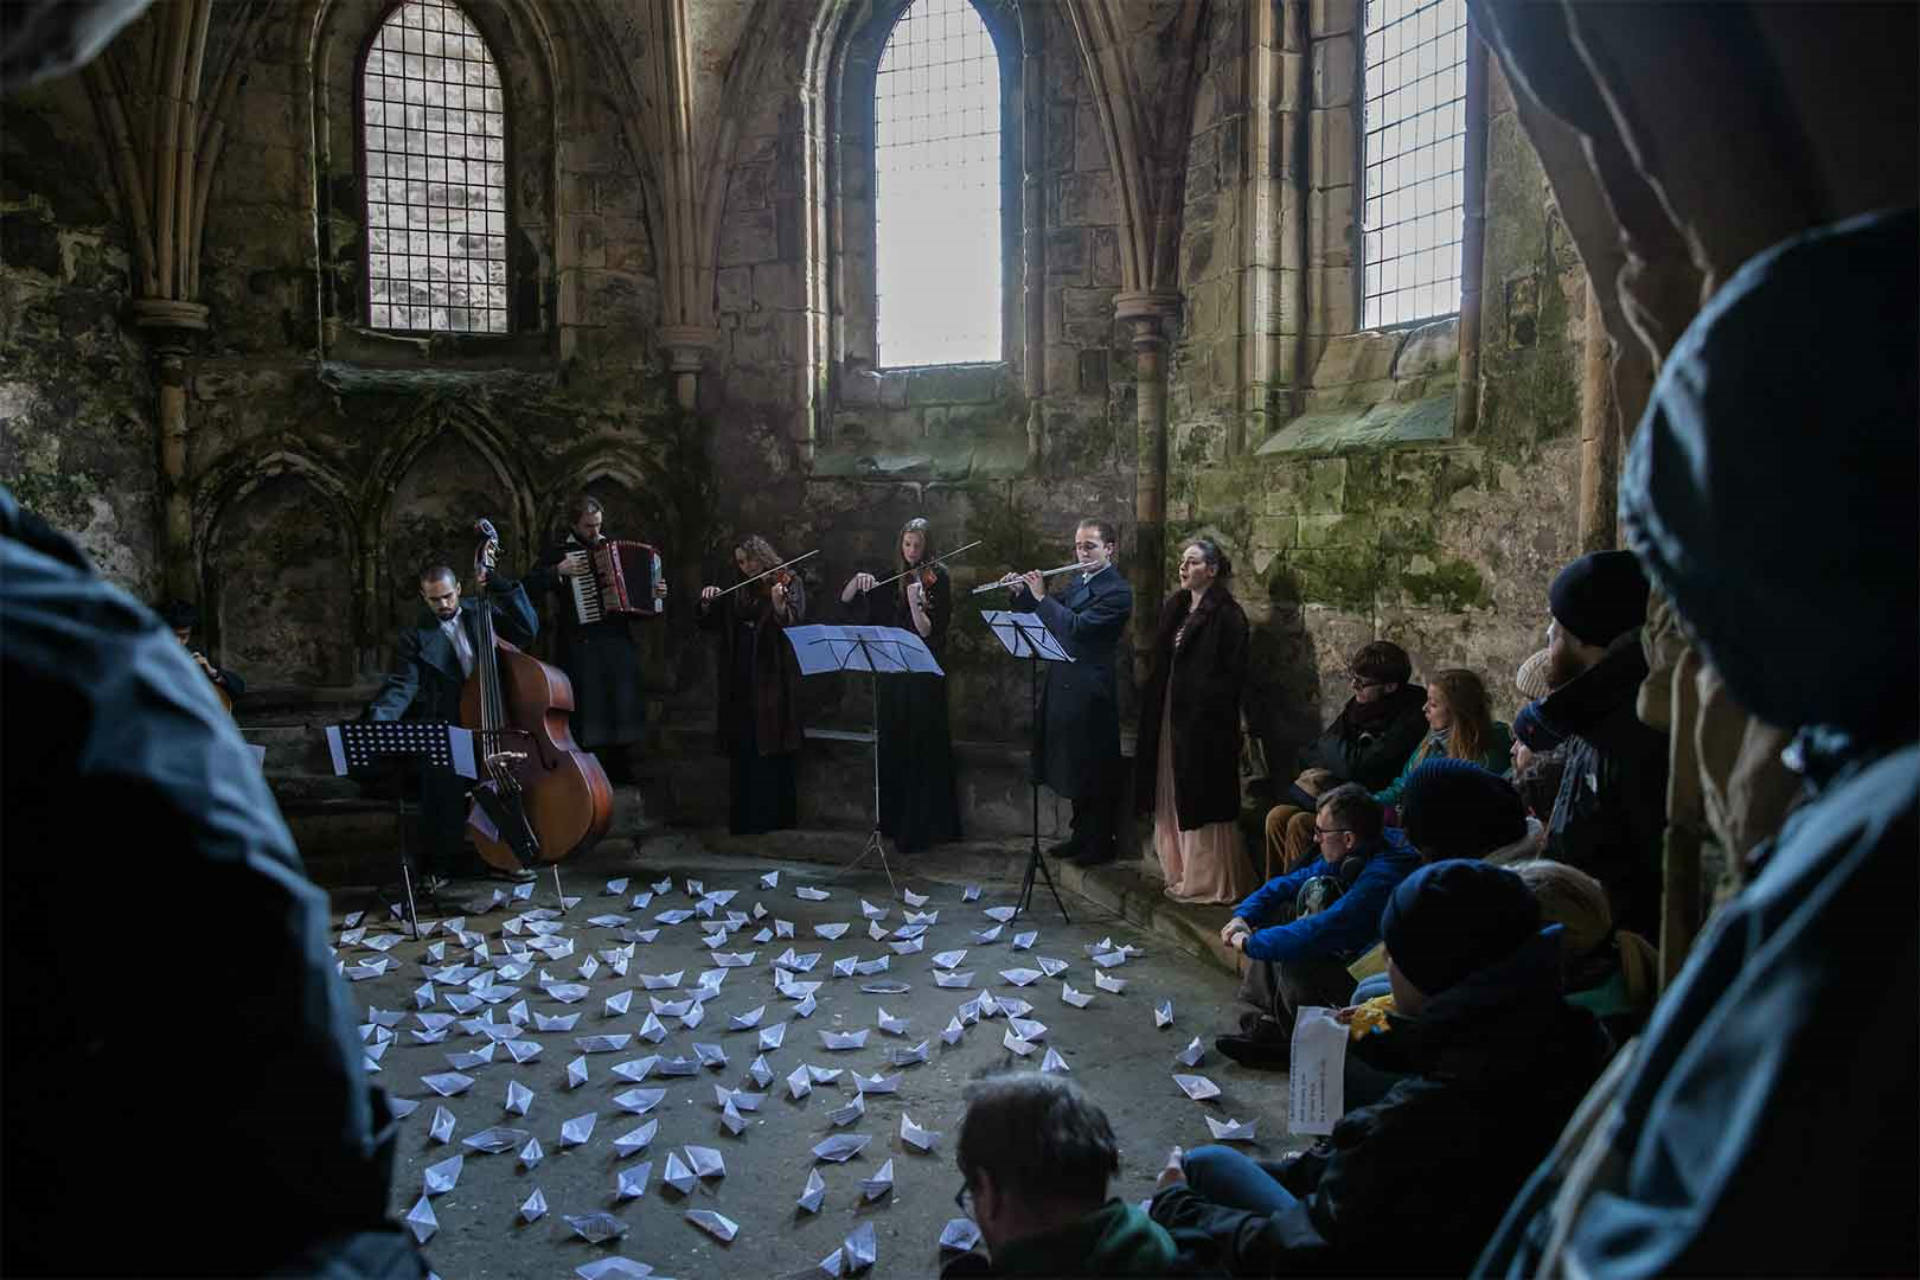 Group of people watching an orchestra playing